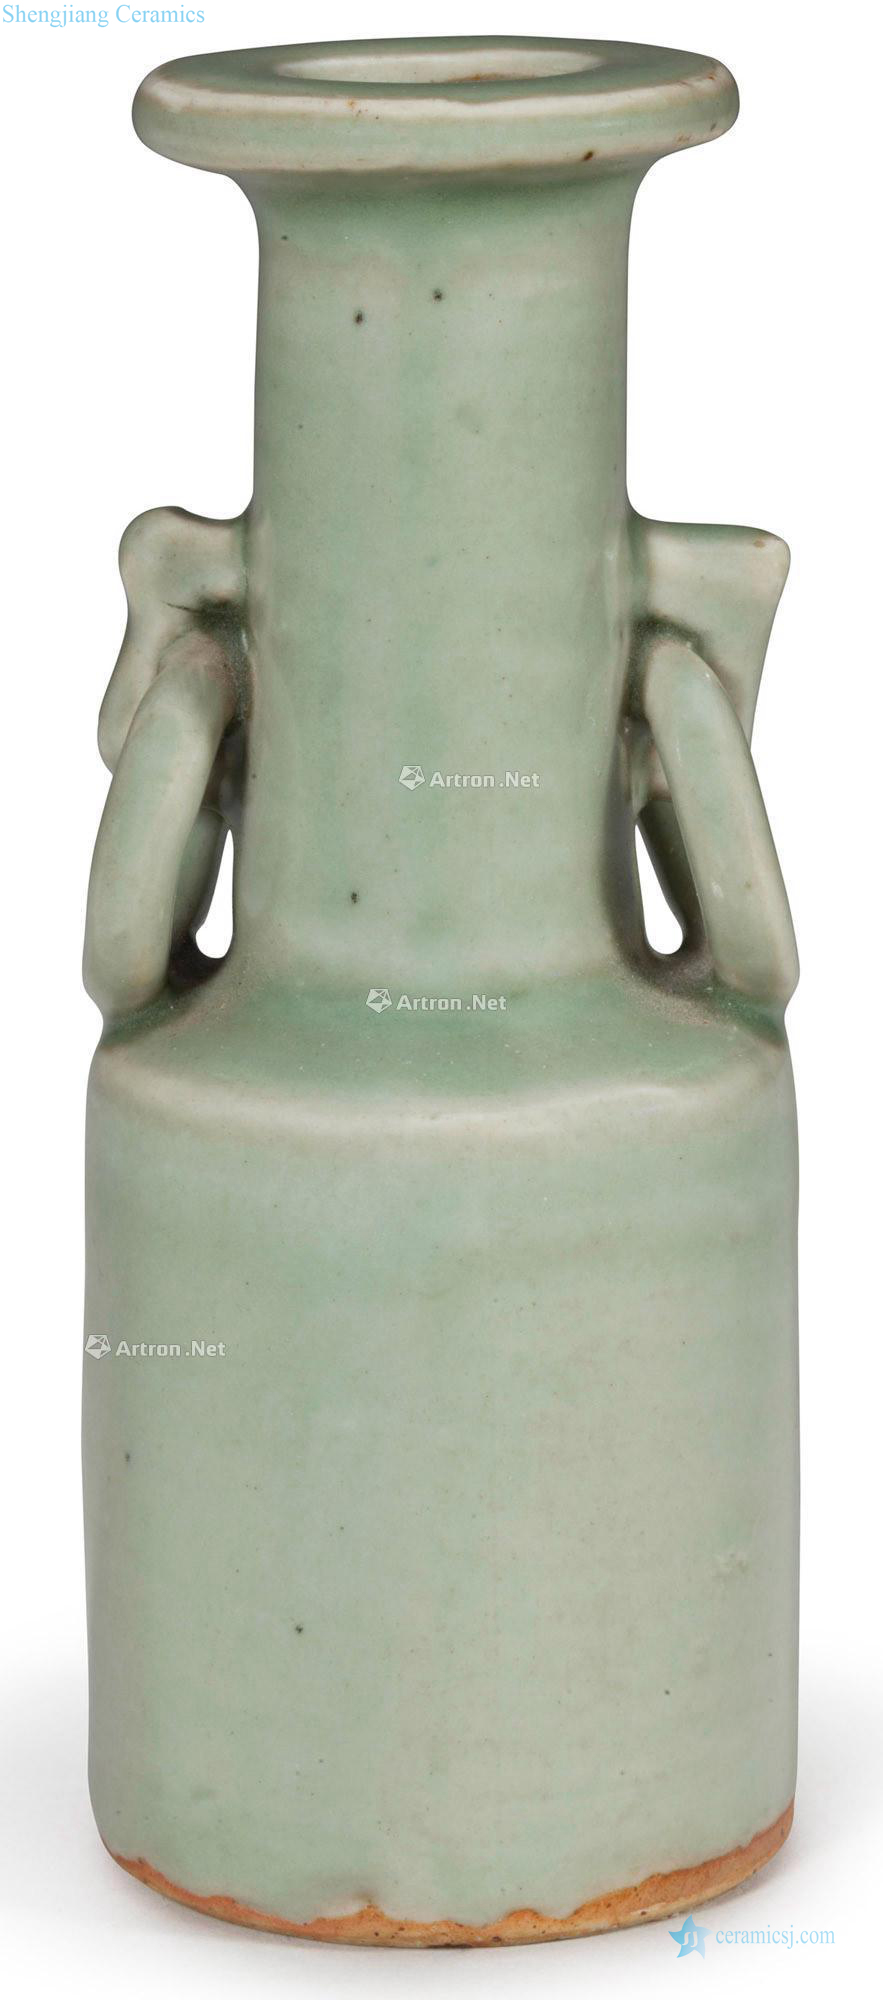 The southern song dynasty in the 13th century Longquan celadon glaze vase with a ring